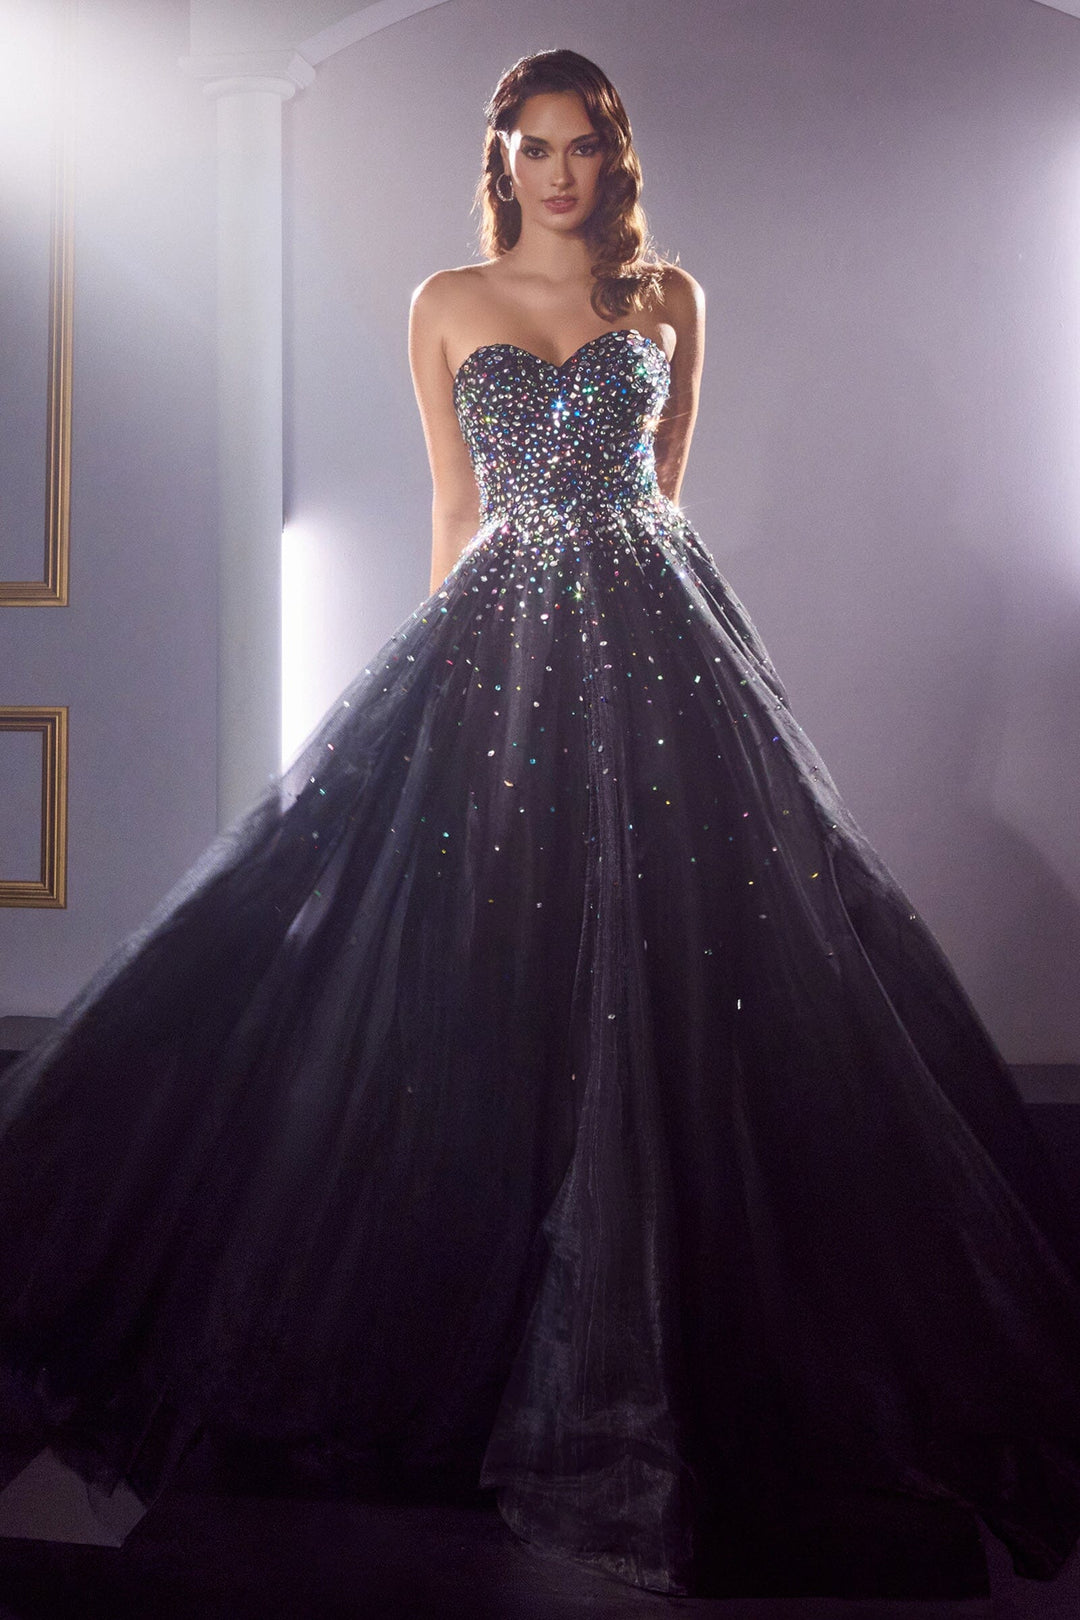 Jeweled Strapless Ball Gown by Ladivine CB114